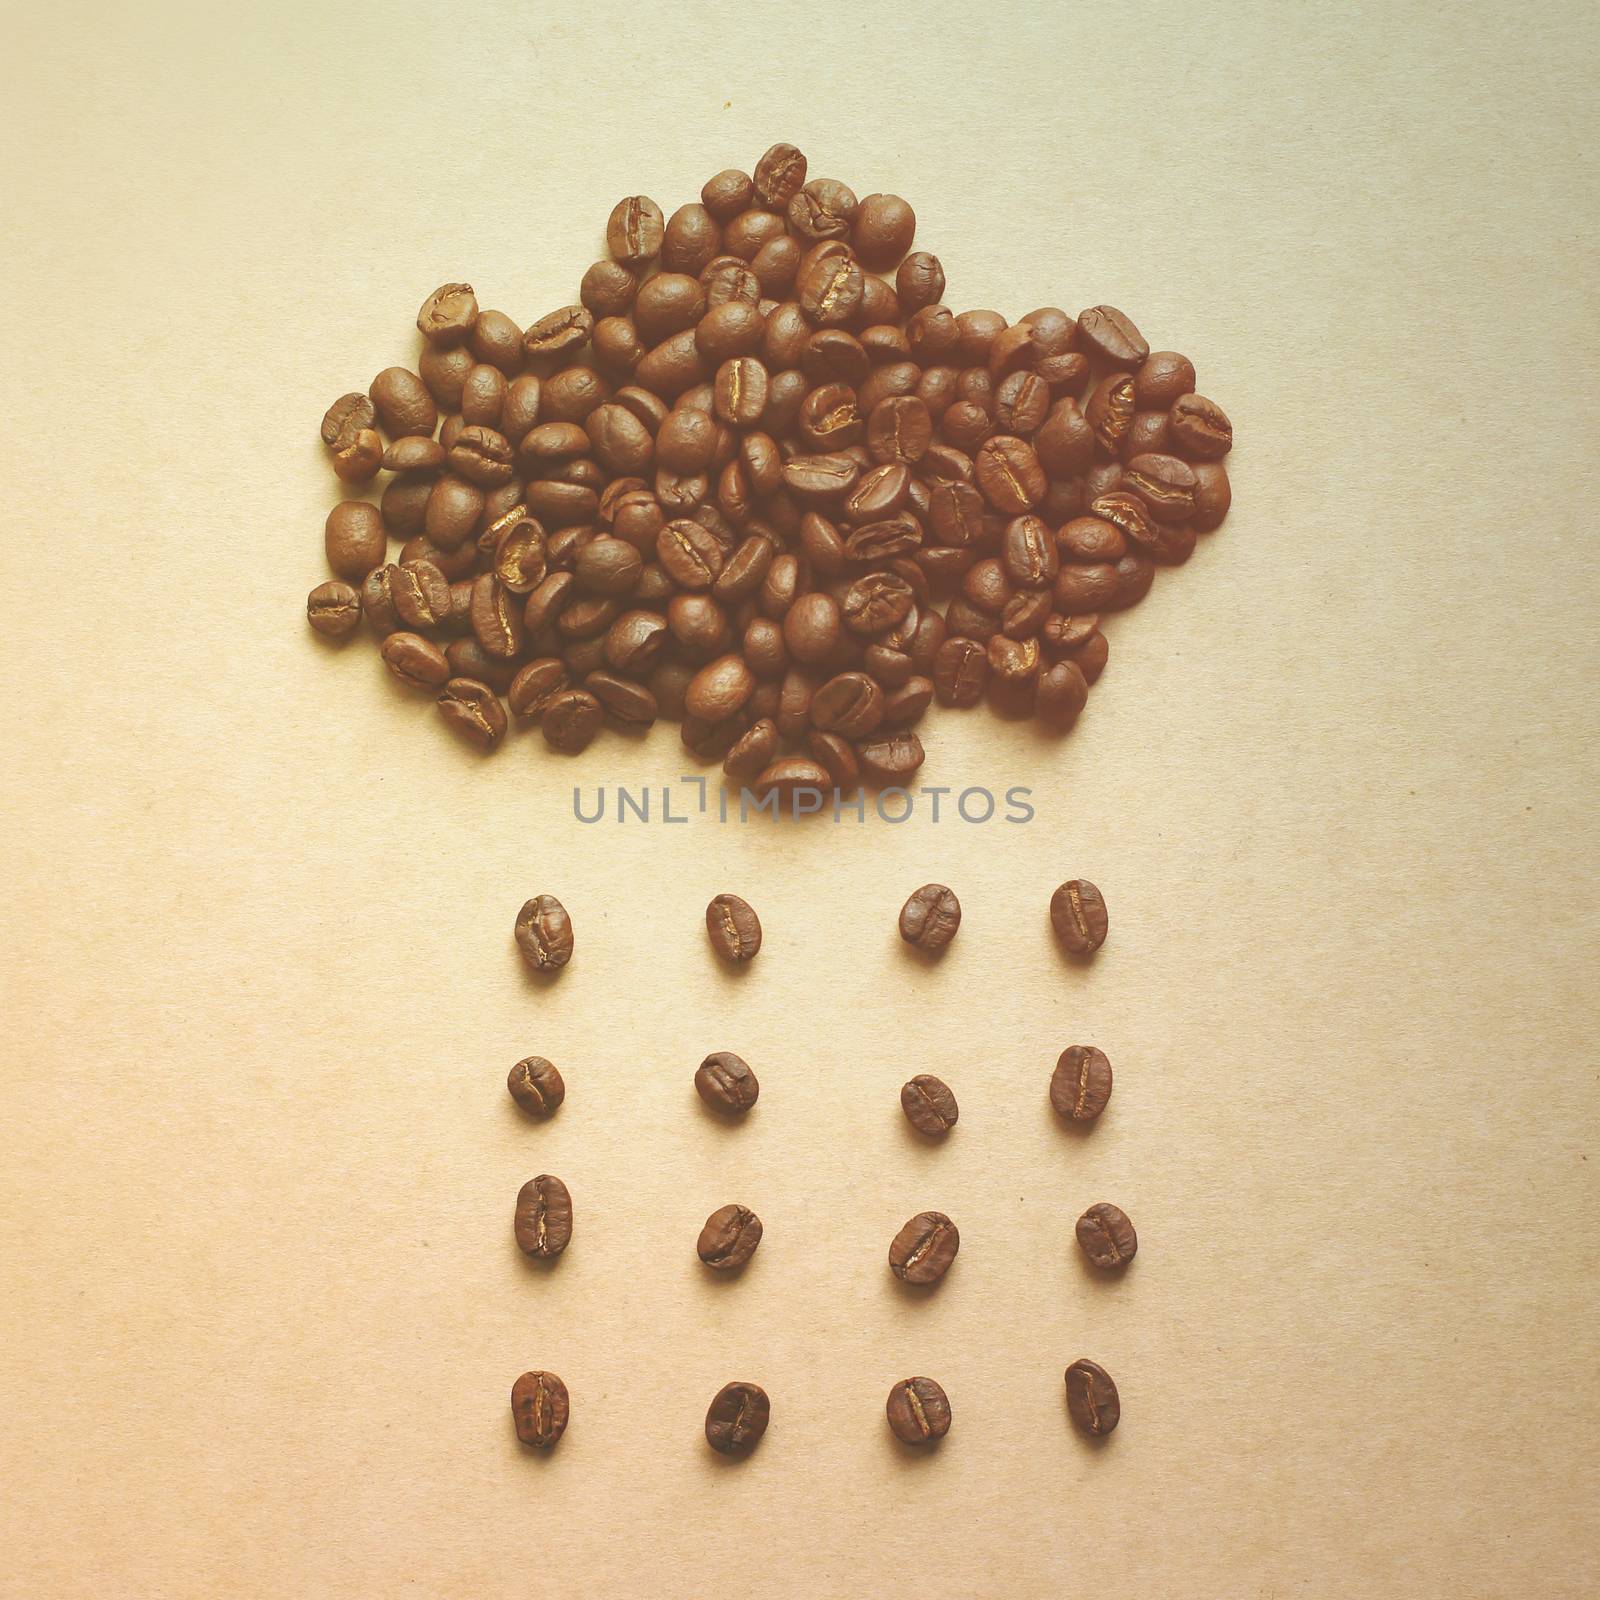 Cloud and rain from coffee beans with retro filter effect by nuchylee